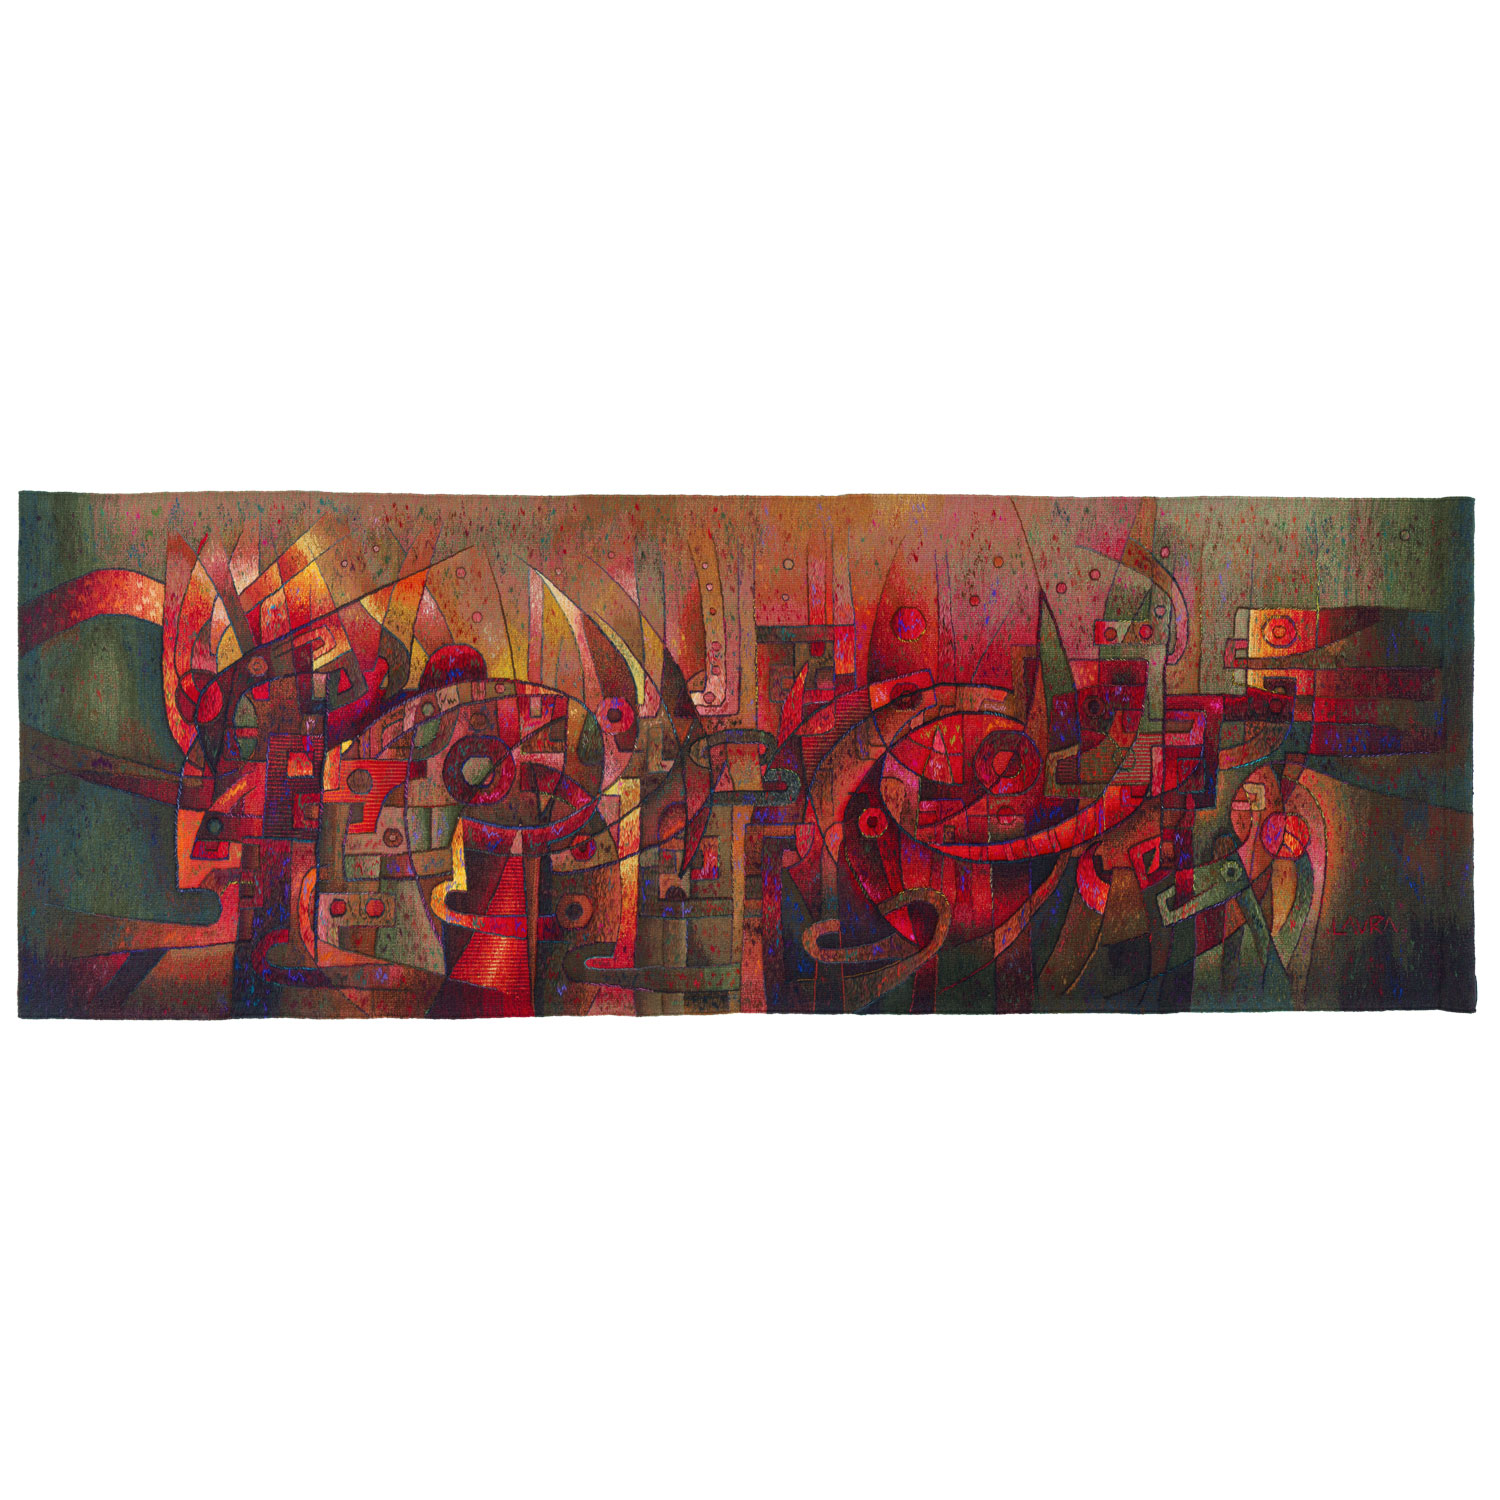 Dance of the Fire GodsSize: 39 x 114"